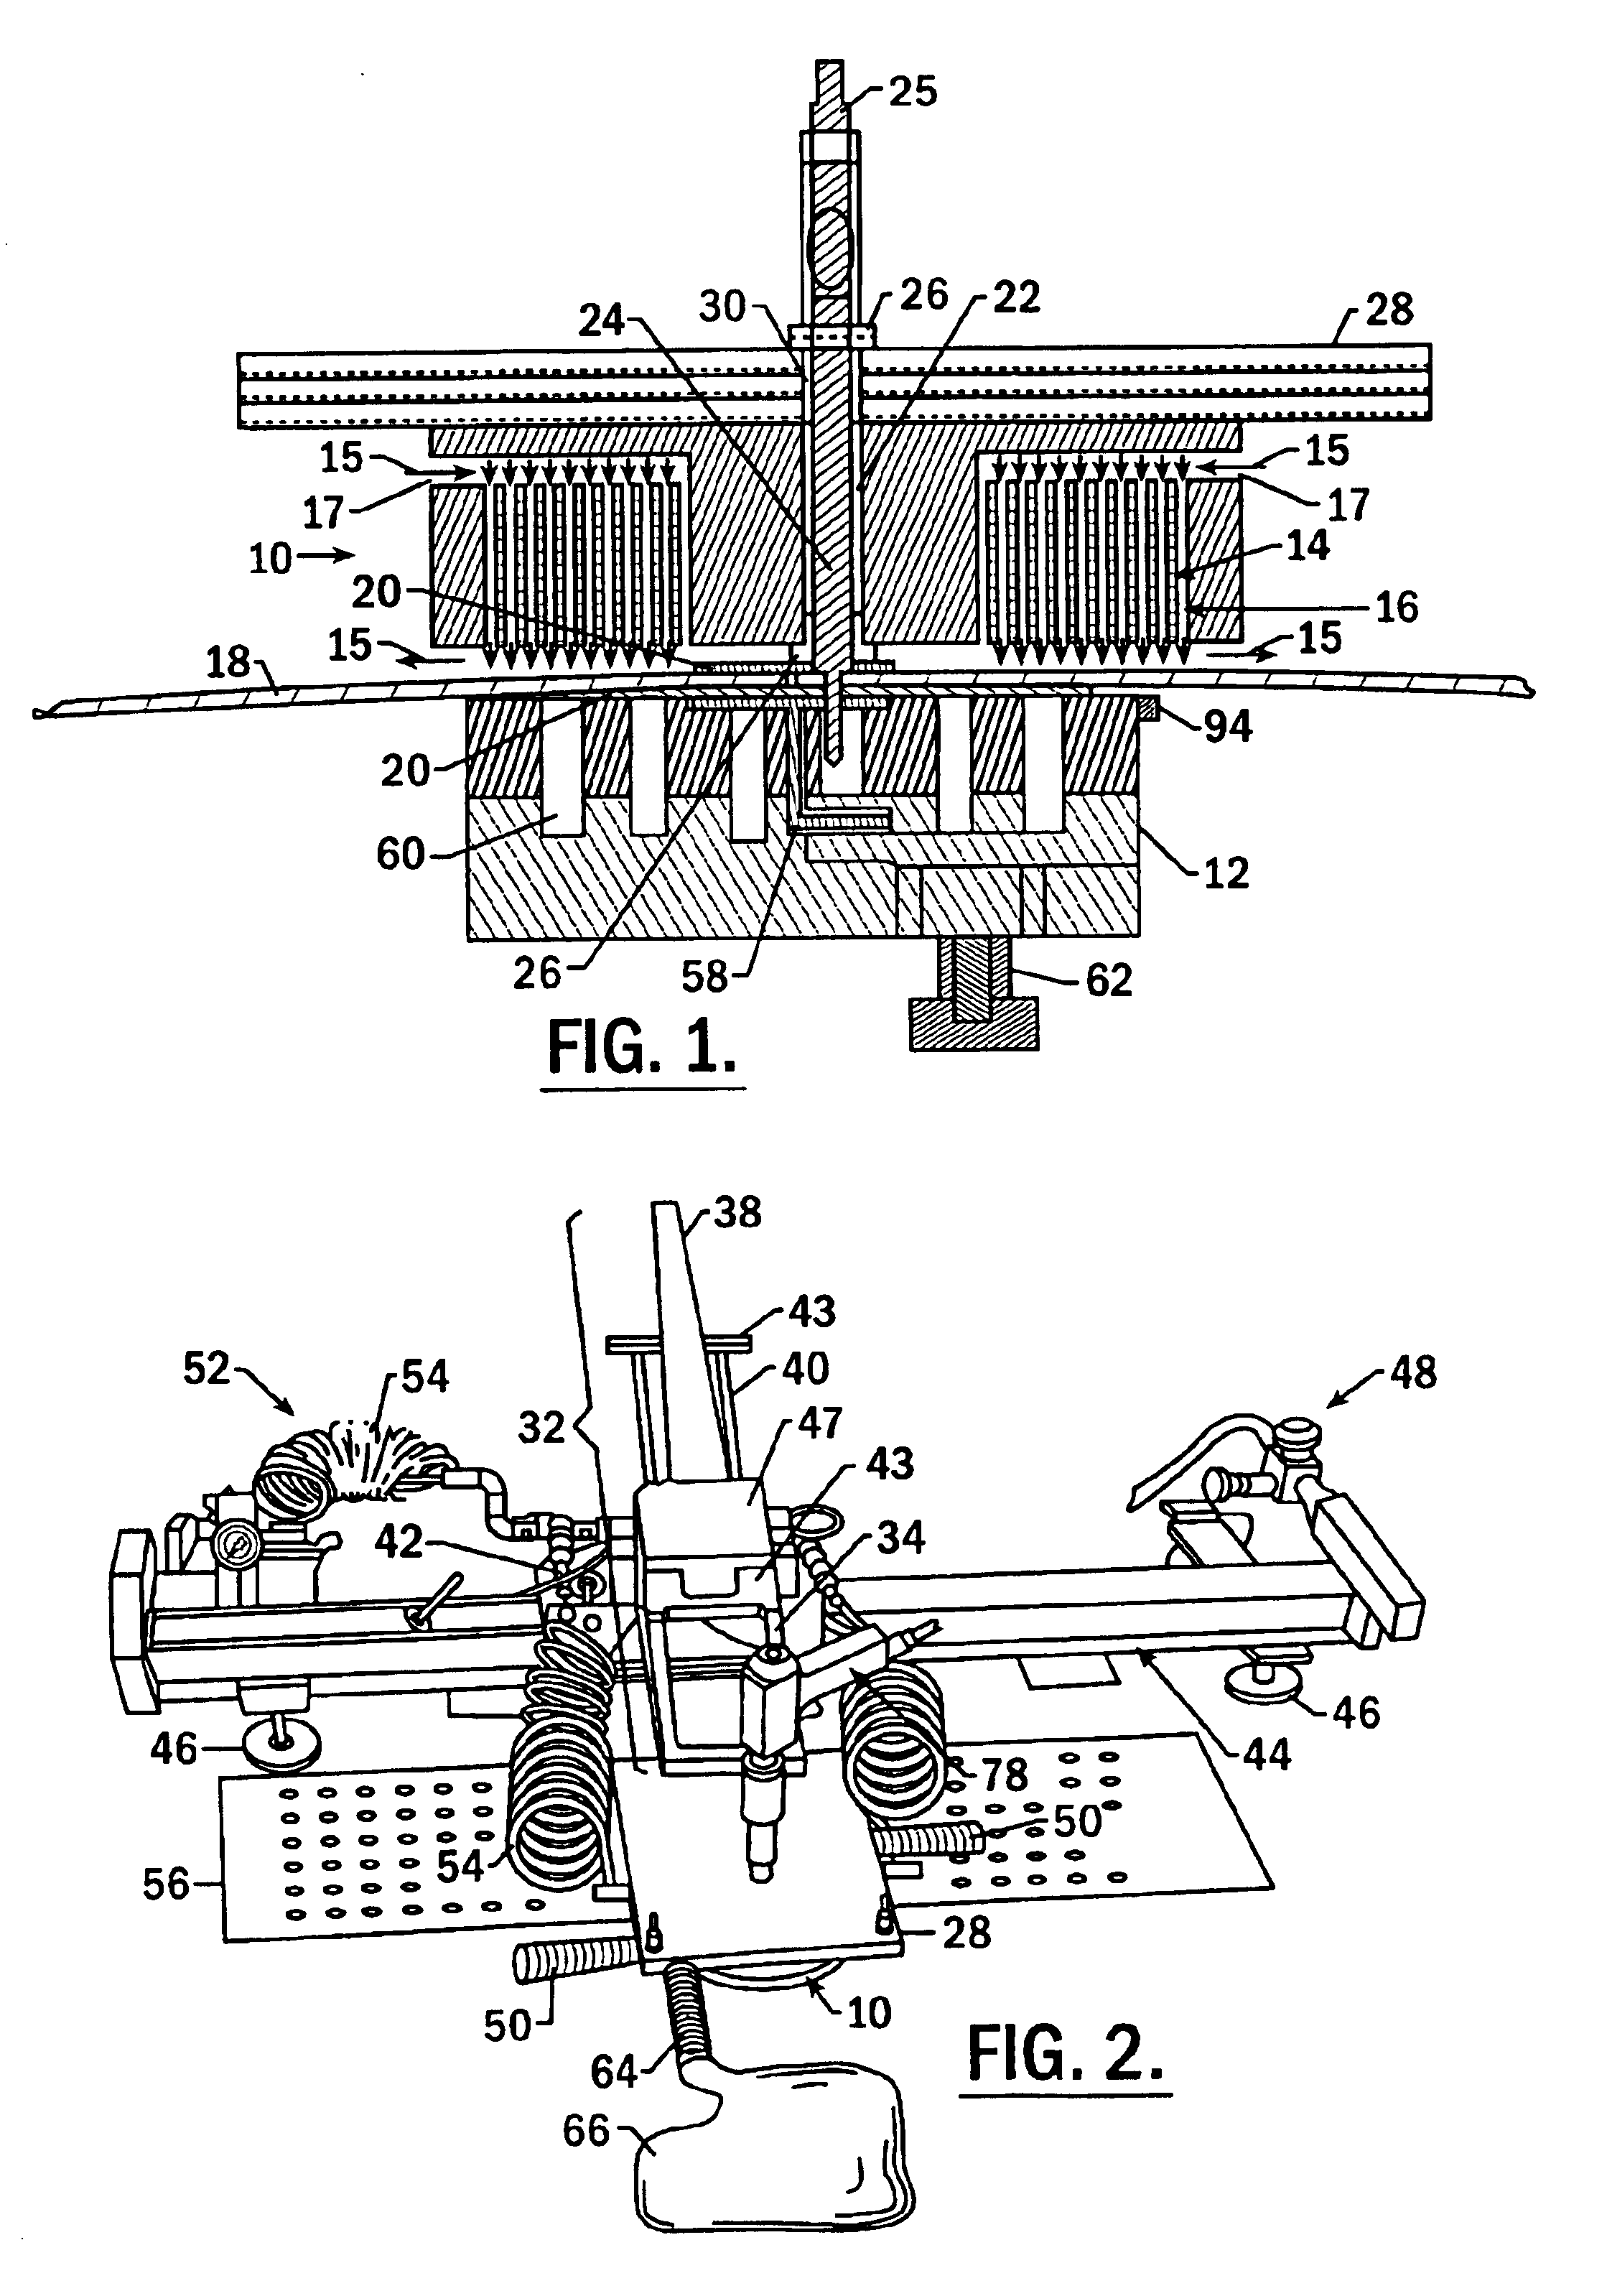 Apparatus and method for drilling holes and optionally inserting fasteners